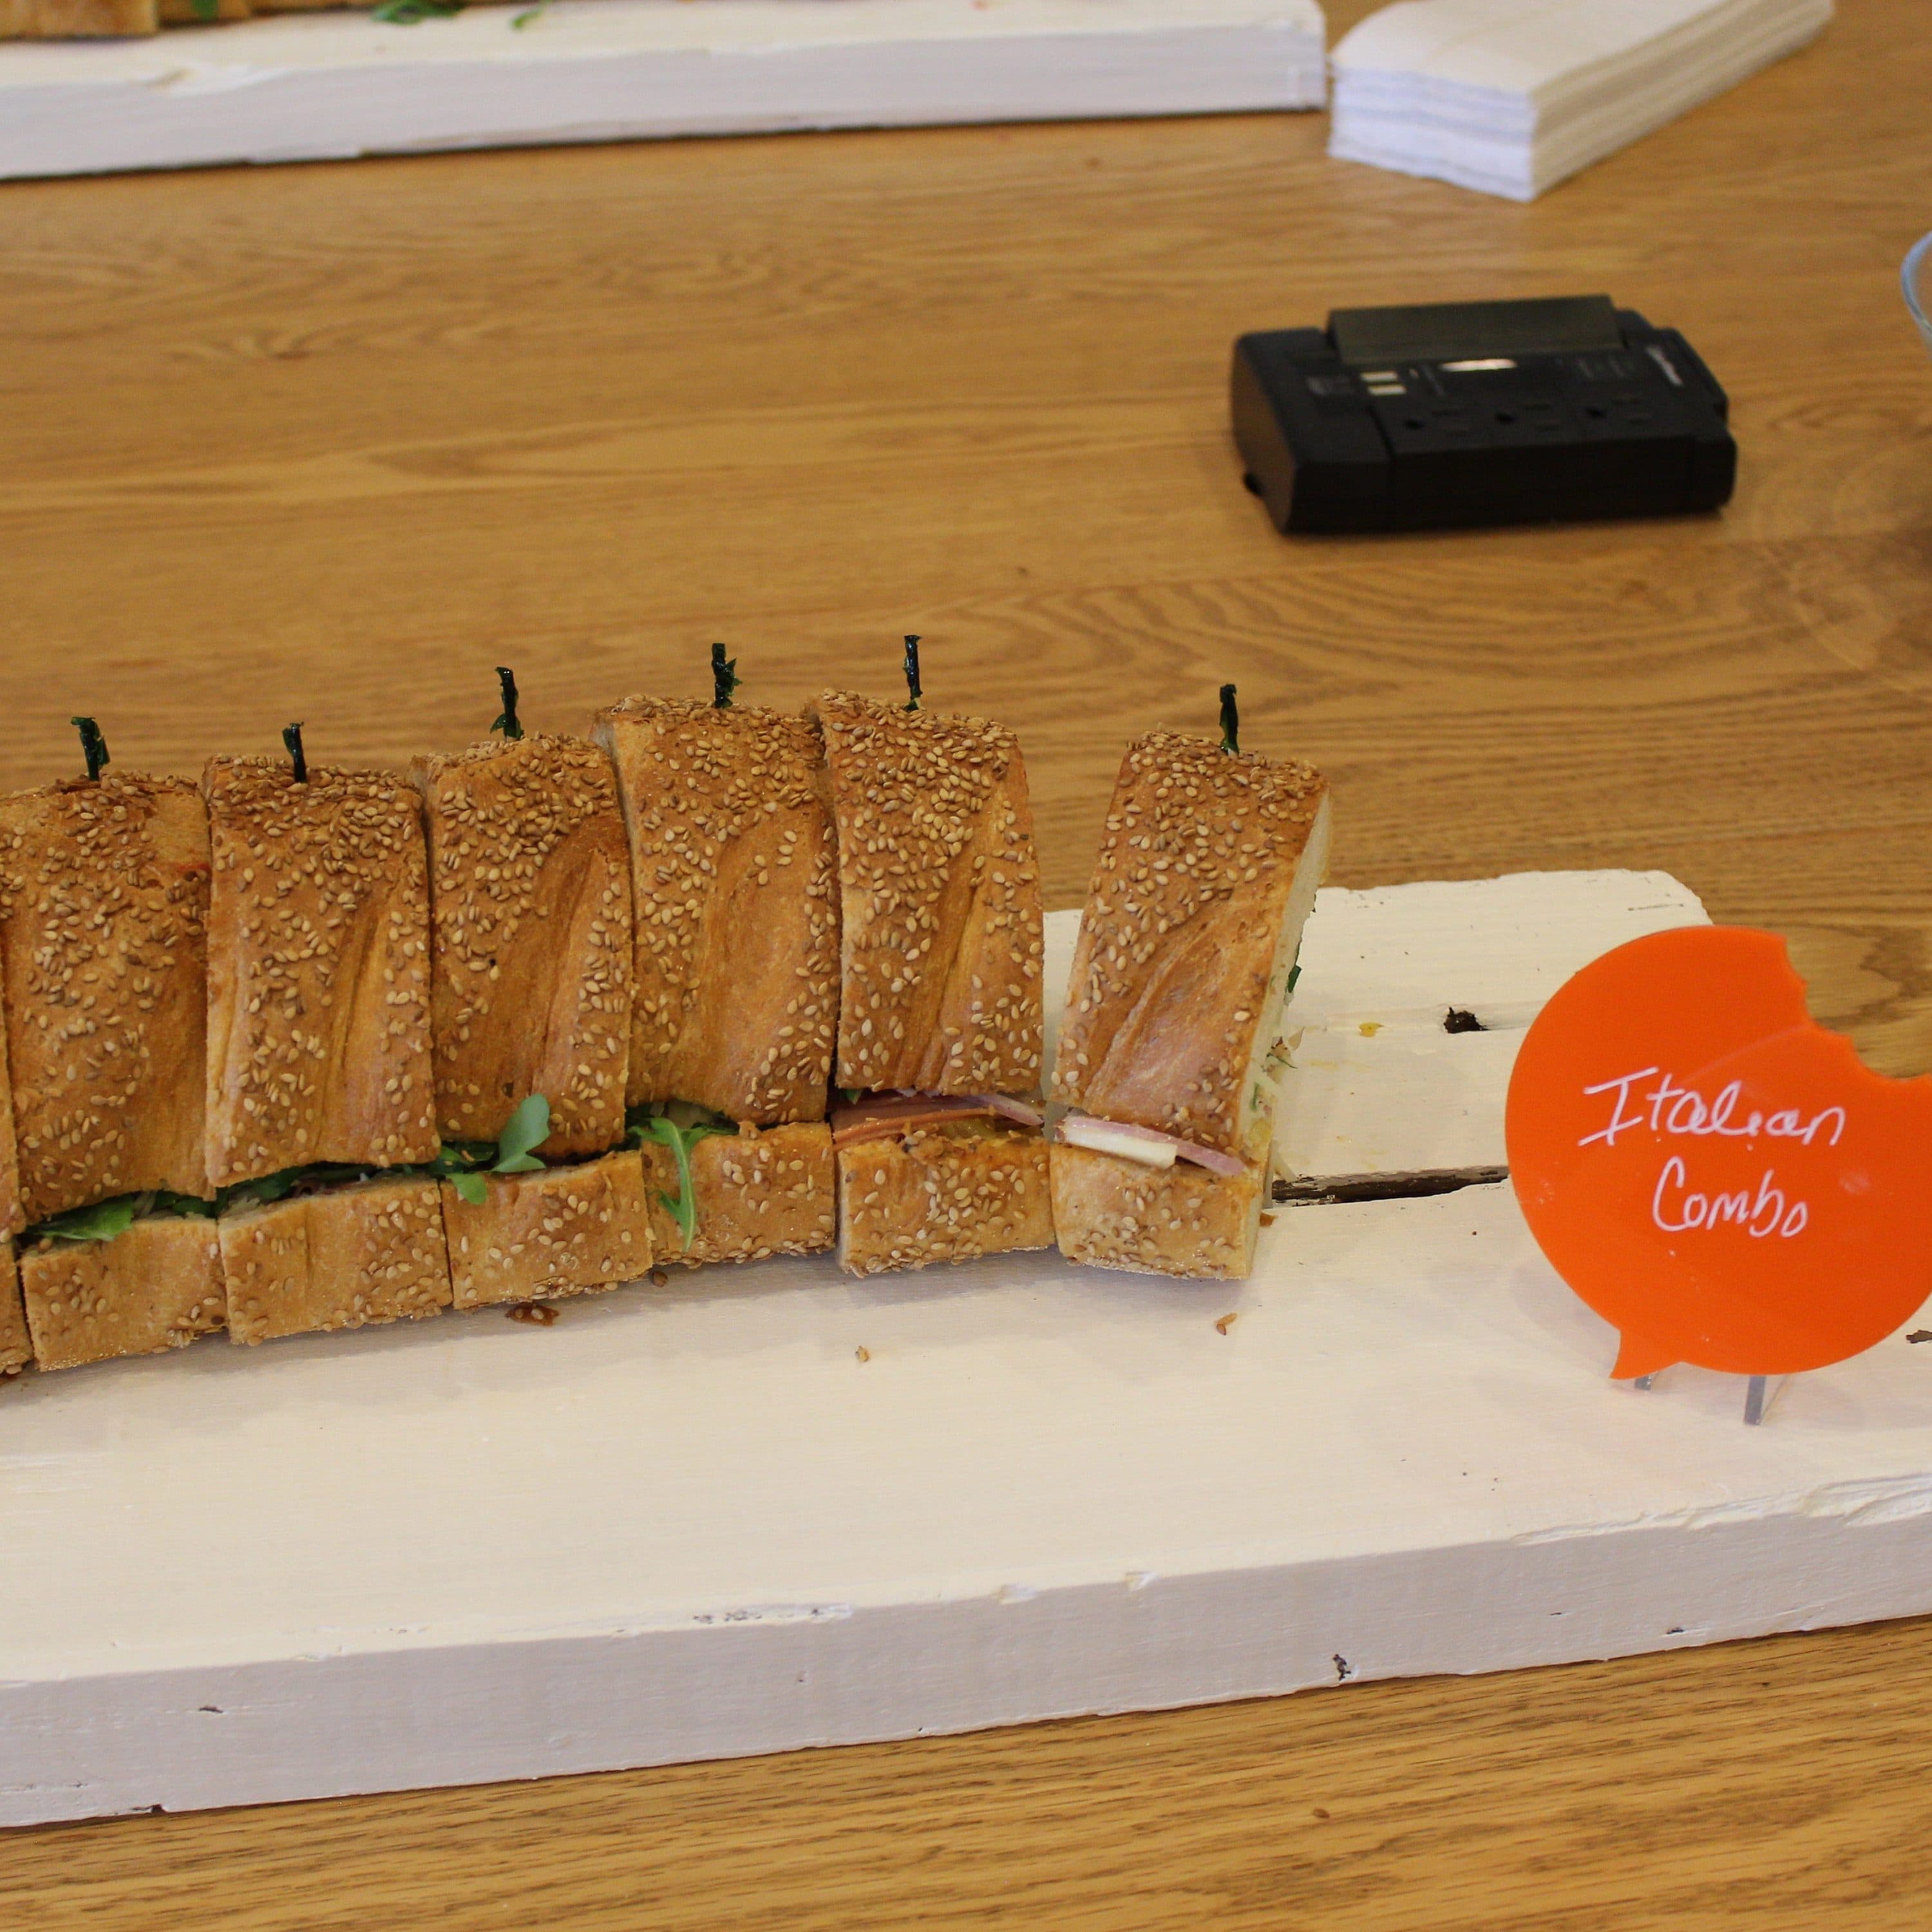 A tray of Italian combo sub sandwiches cut into smaller pieces is displayed on a wooden table. The sandwiches, with visible lettuce and deli meats, are placed on a white wooden board. A red speech bubble-shaped label reads "Italian Combo.